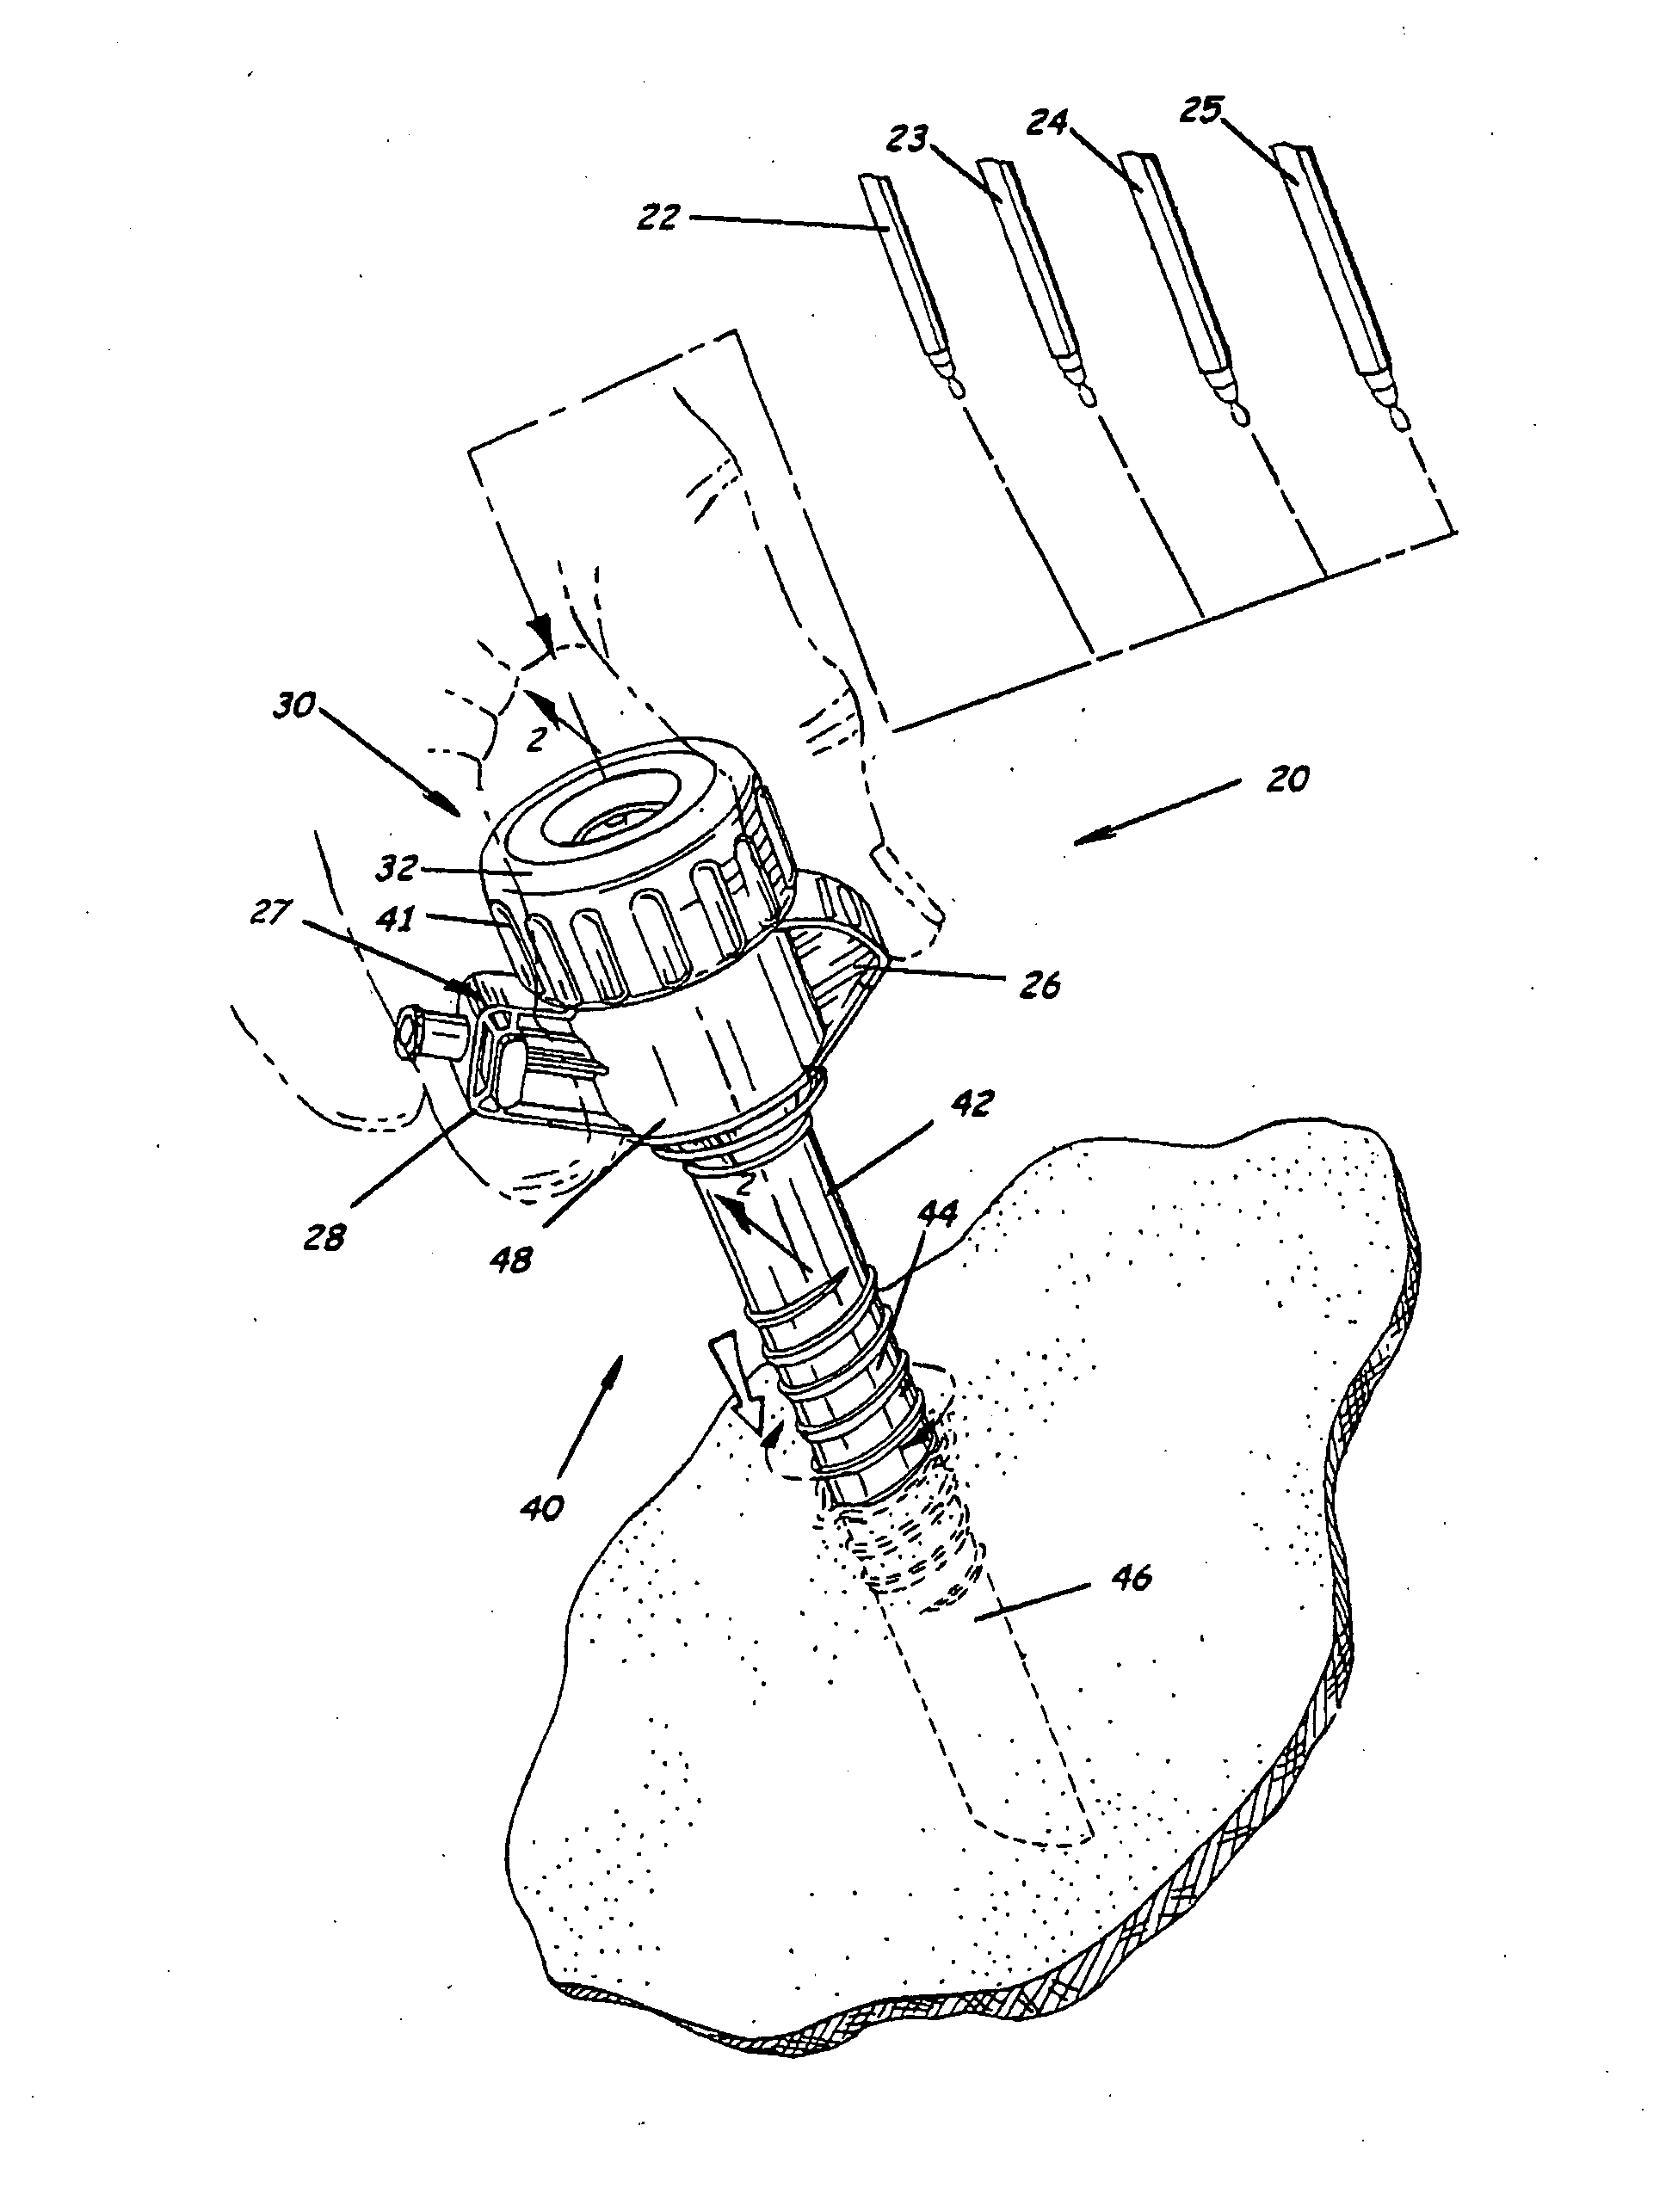 Trocar and cannula assembly having conical valve and related methods